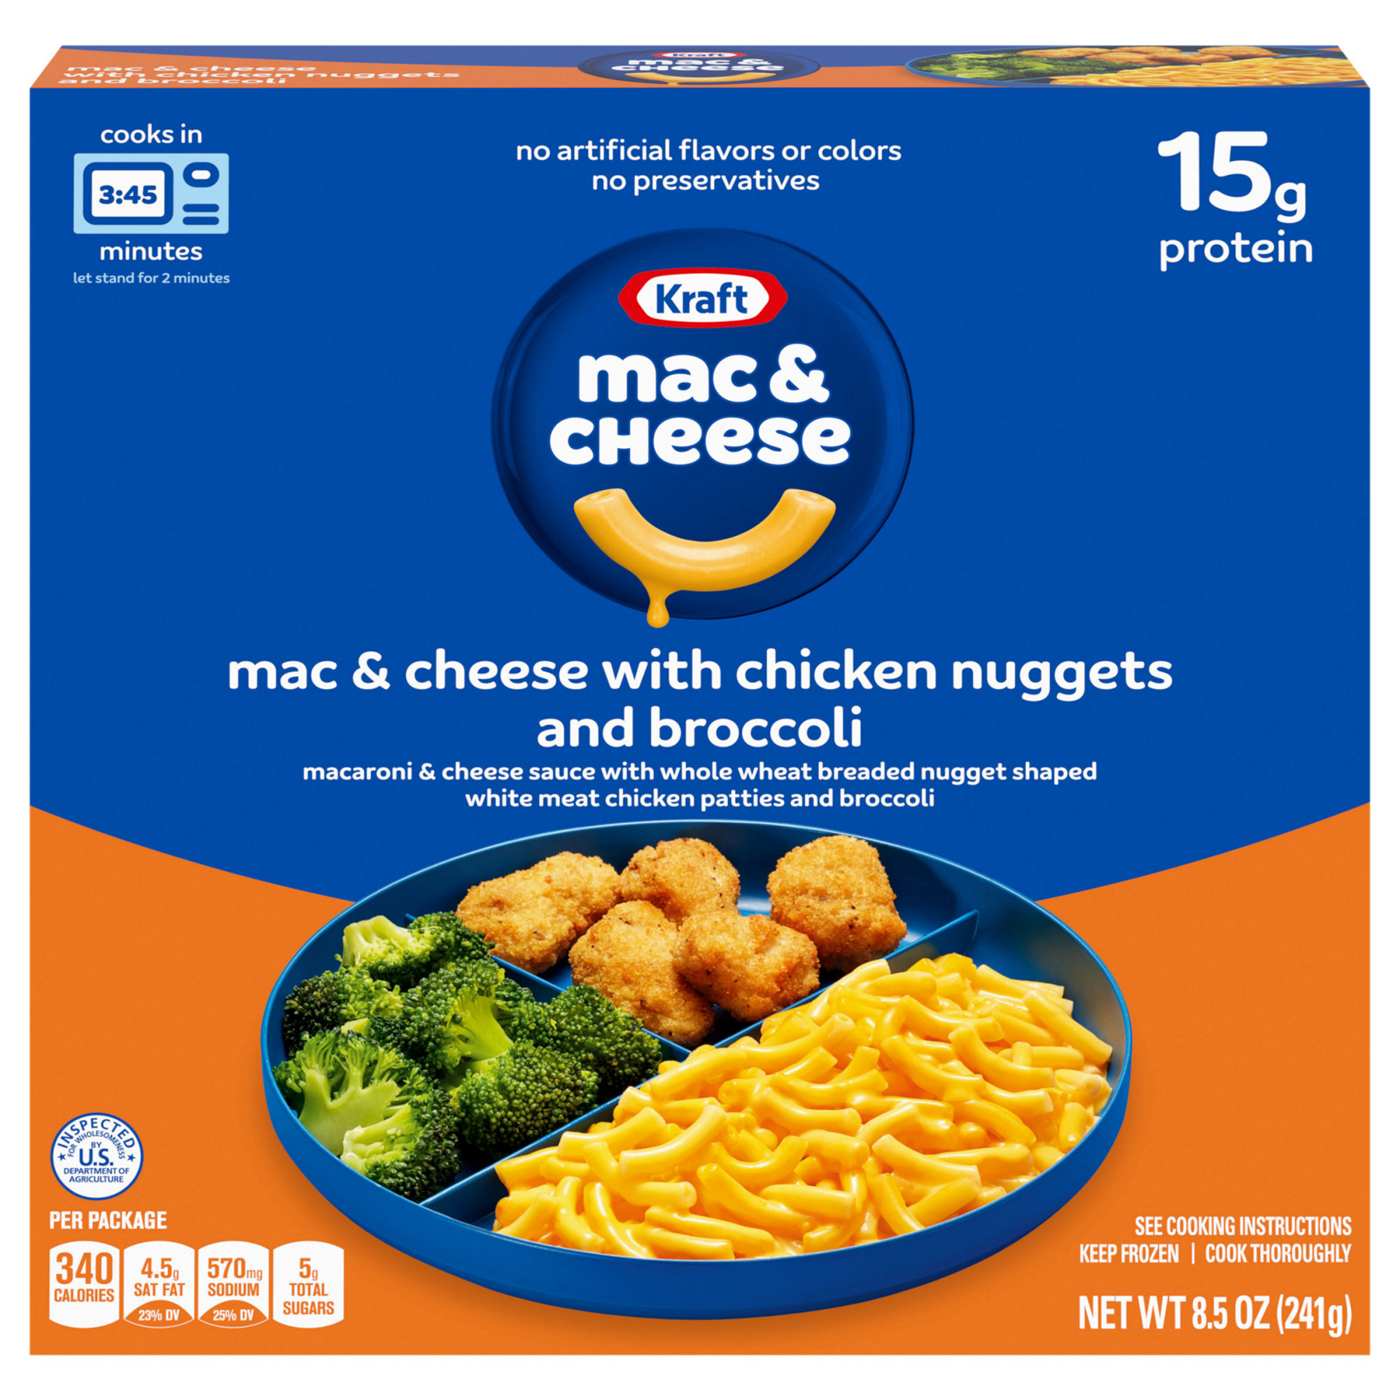 Kraft Macaroni & Cheese with Breaded Chicken Nuggets & Broccoli Dinner; image 1 of 8